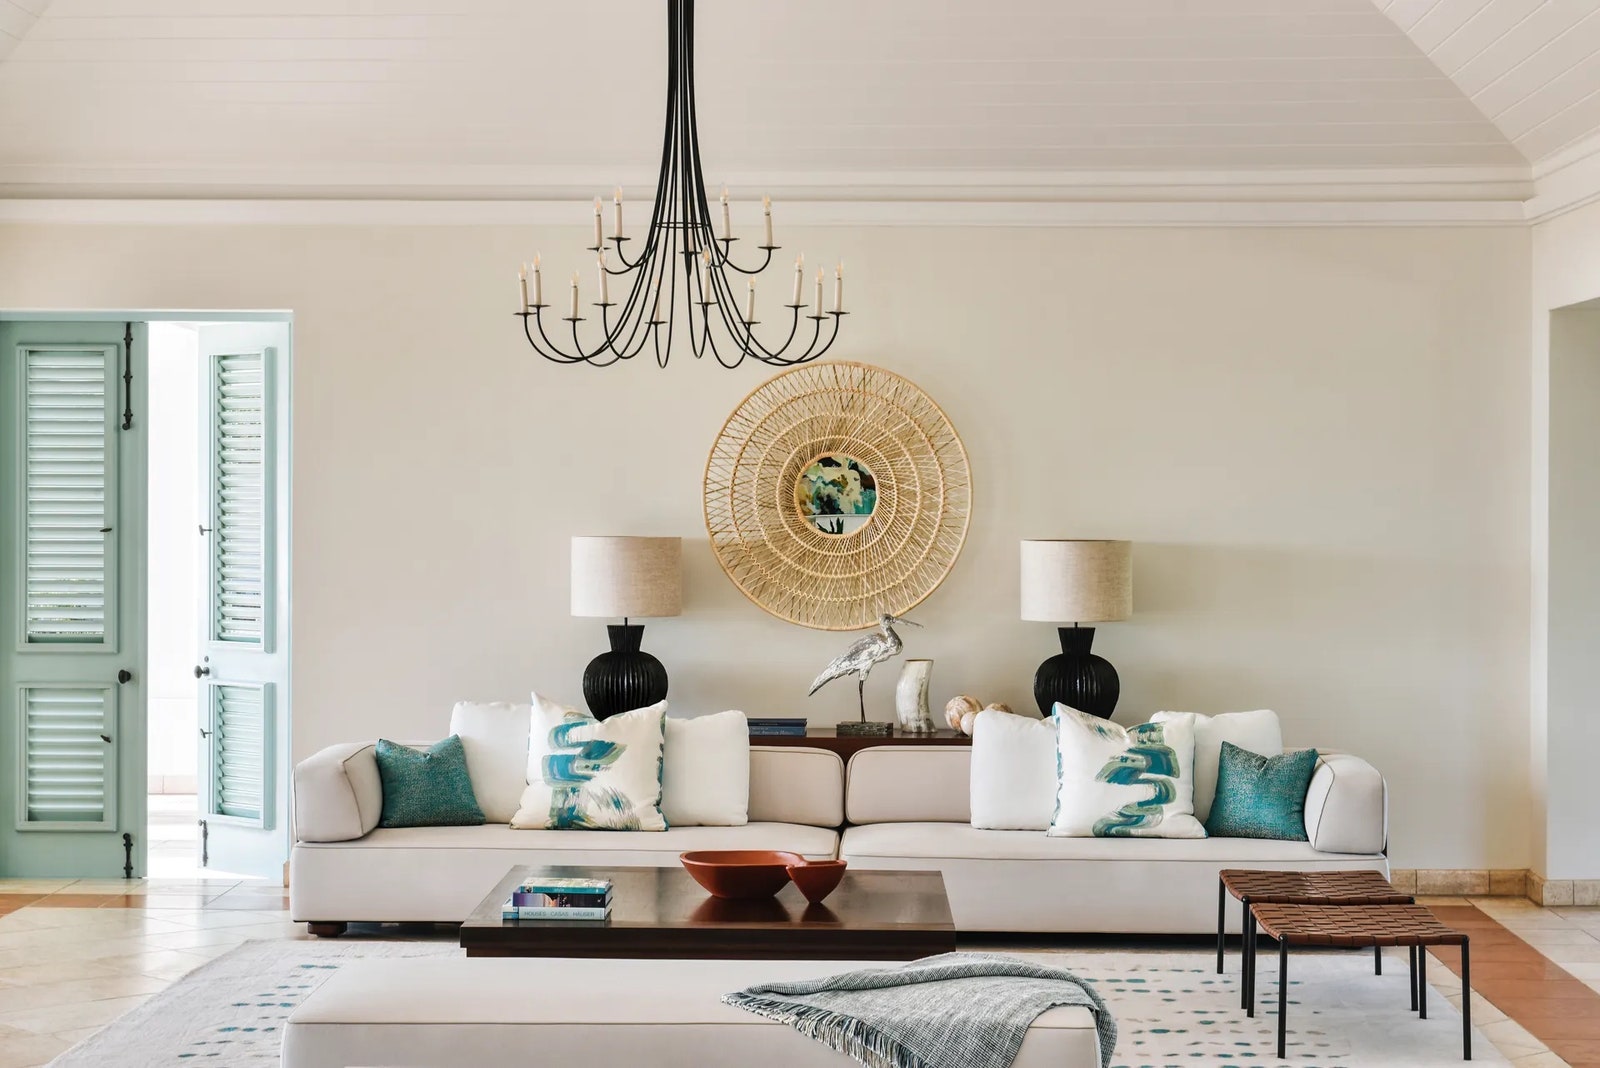 Studio IDC used a palette of cool hues for the bright interiors of the Evangeline Estate on Jumby Bay Island in Antigua.